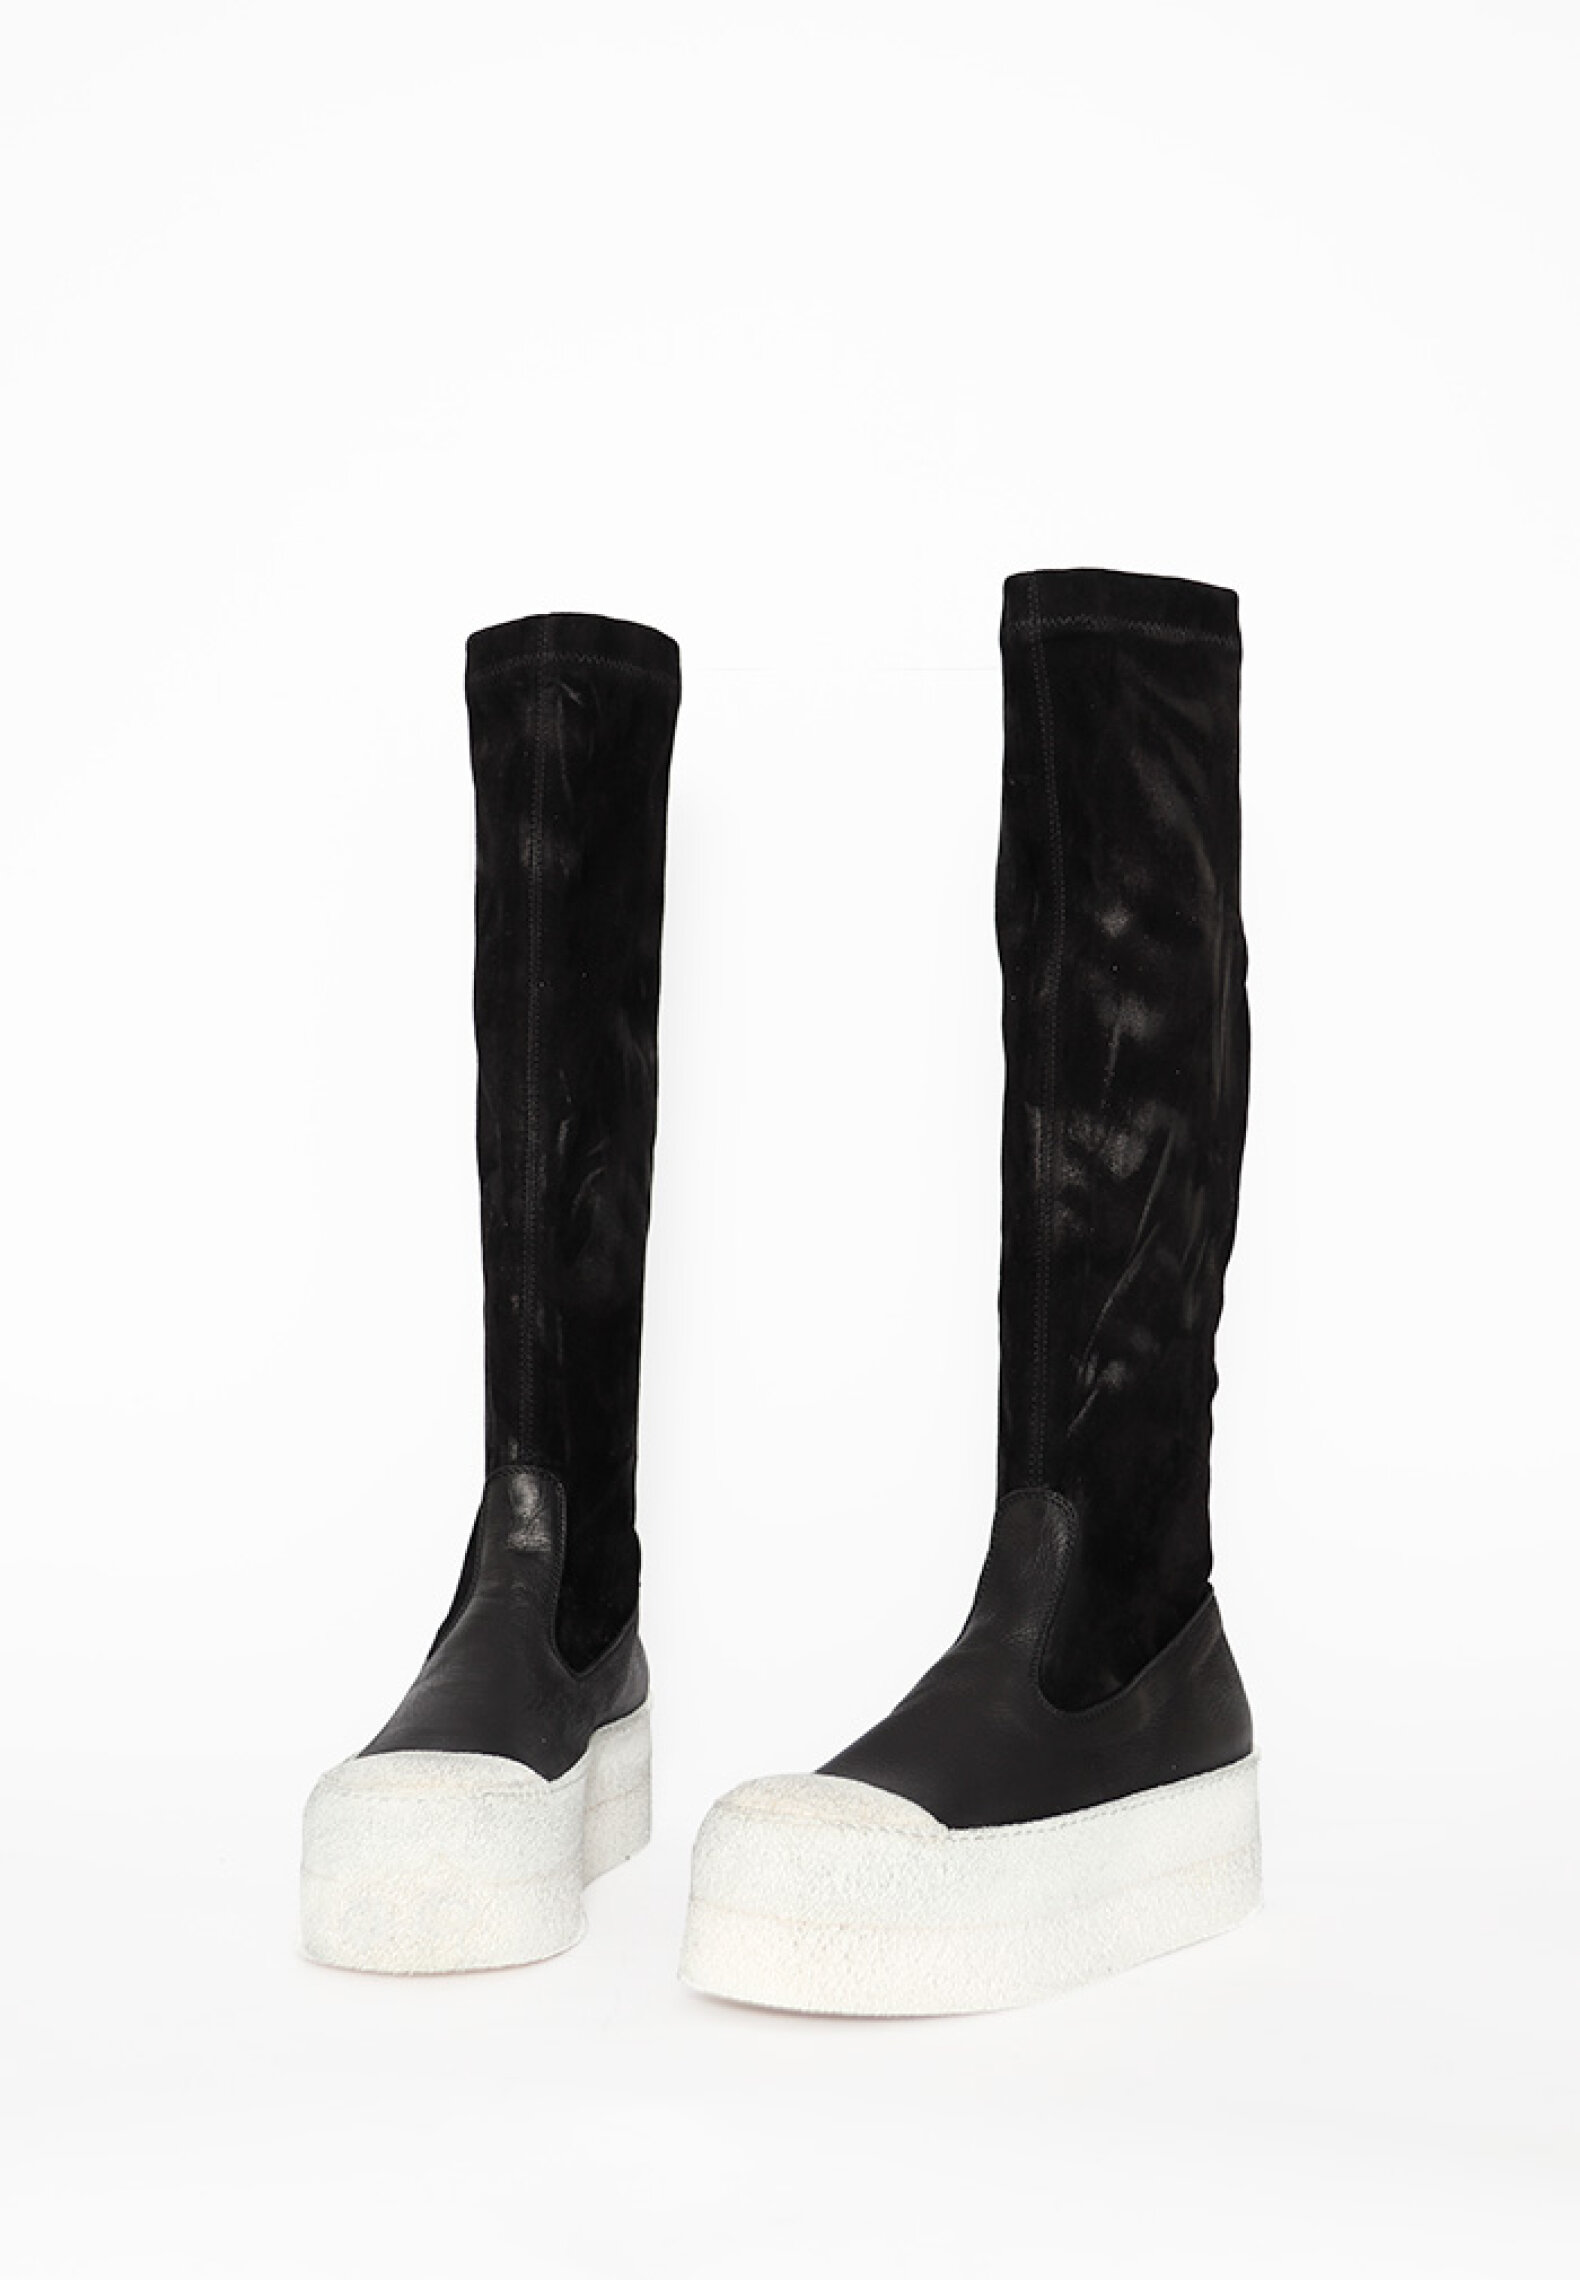 Long boots - Lofina - Long boot with zipper and suede strech